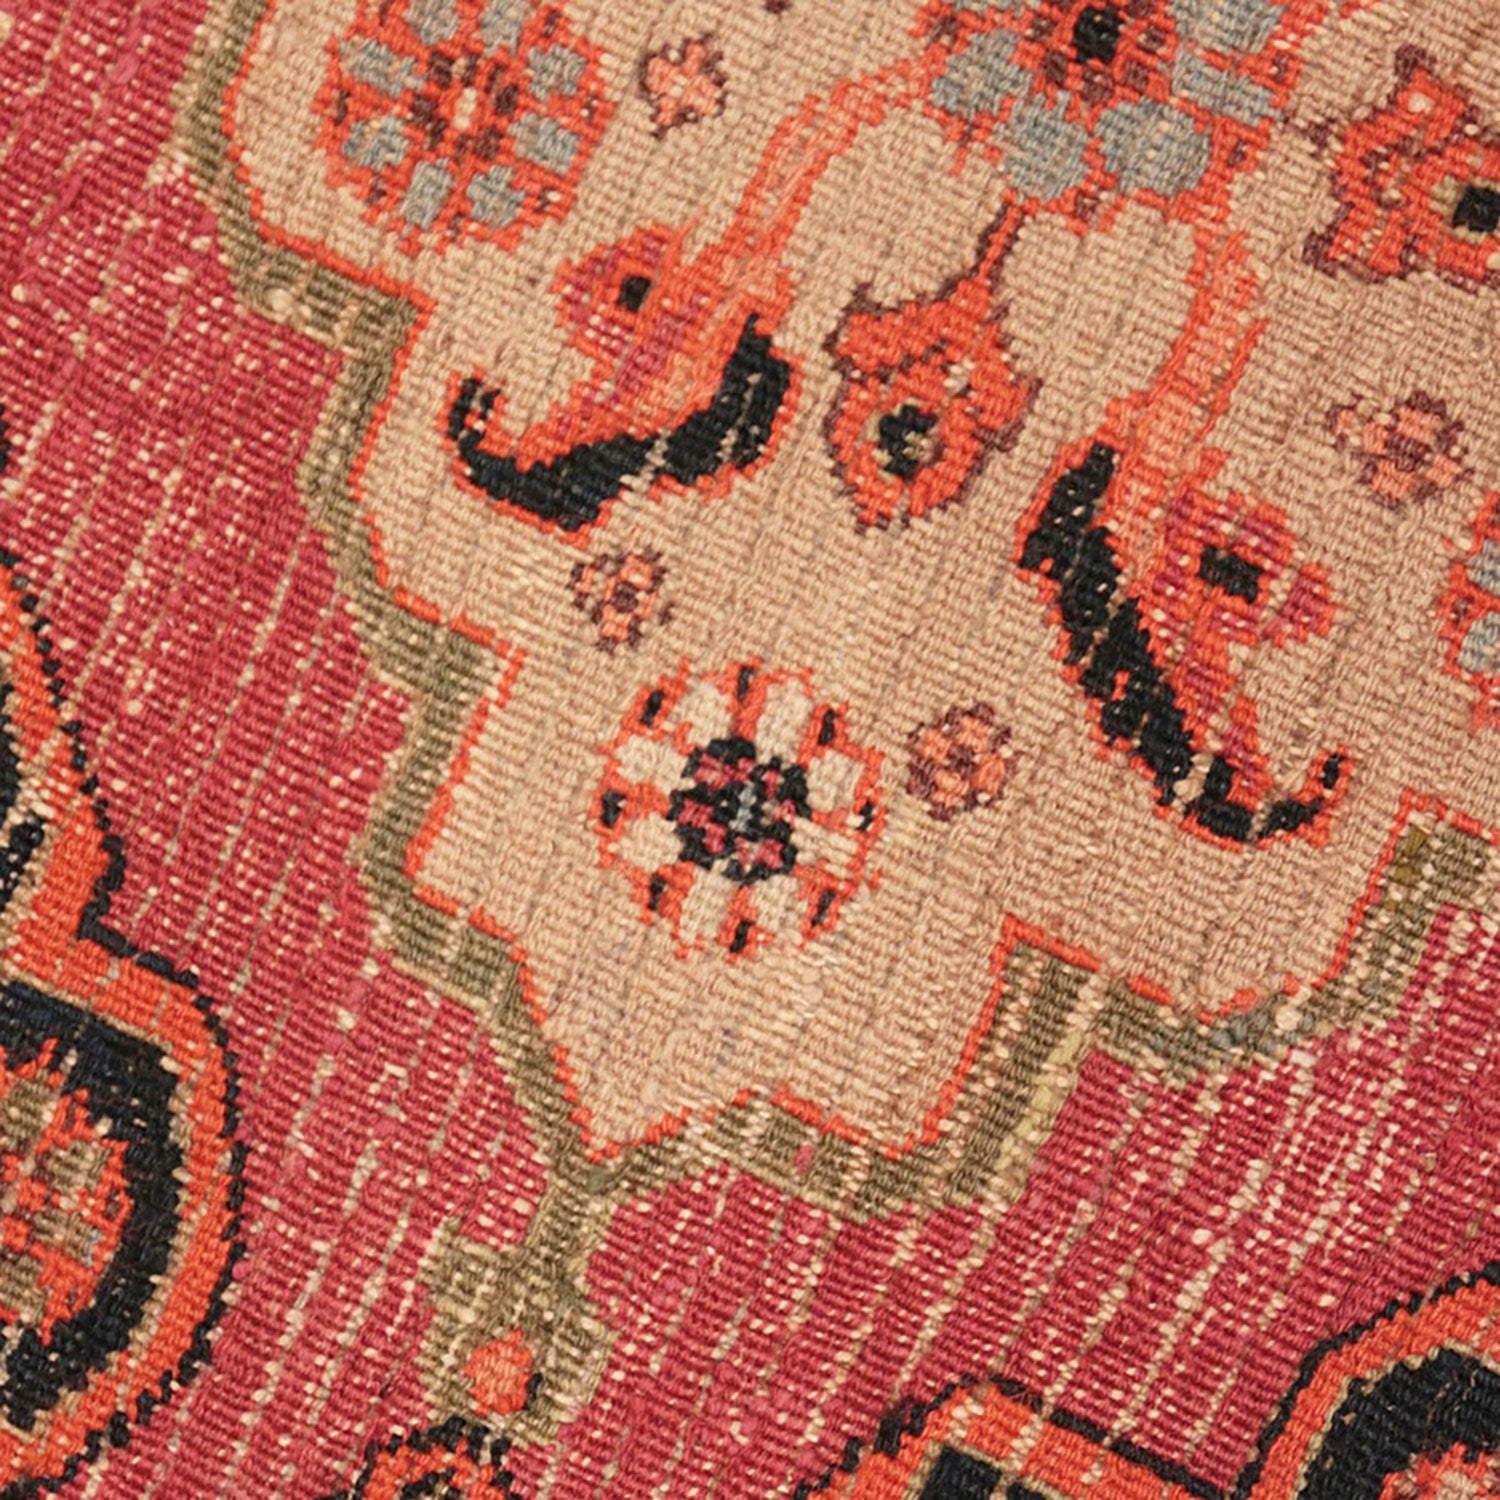 Close-up view of a detailed, worn woven rug with floral motif.